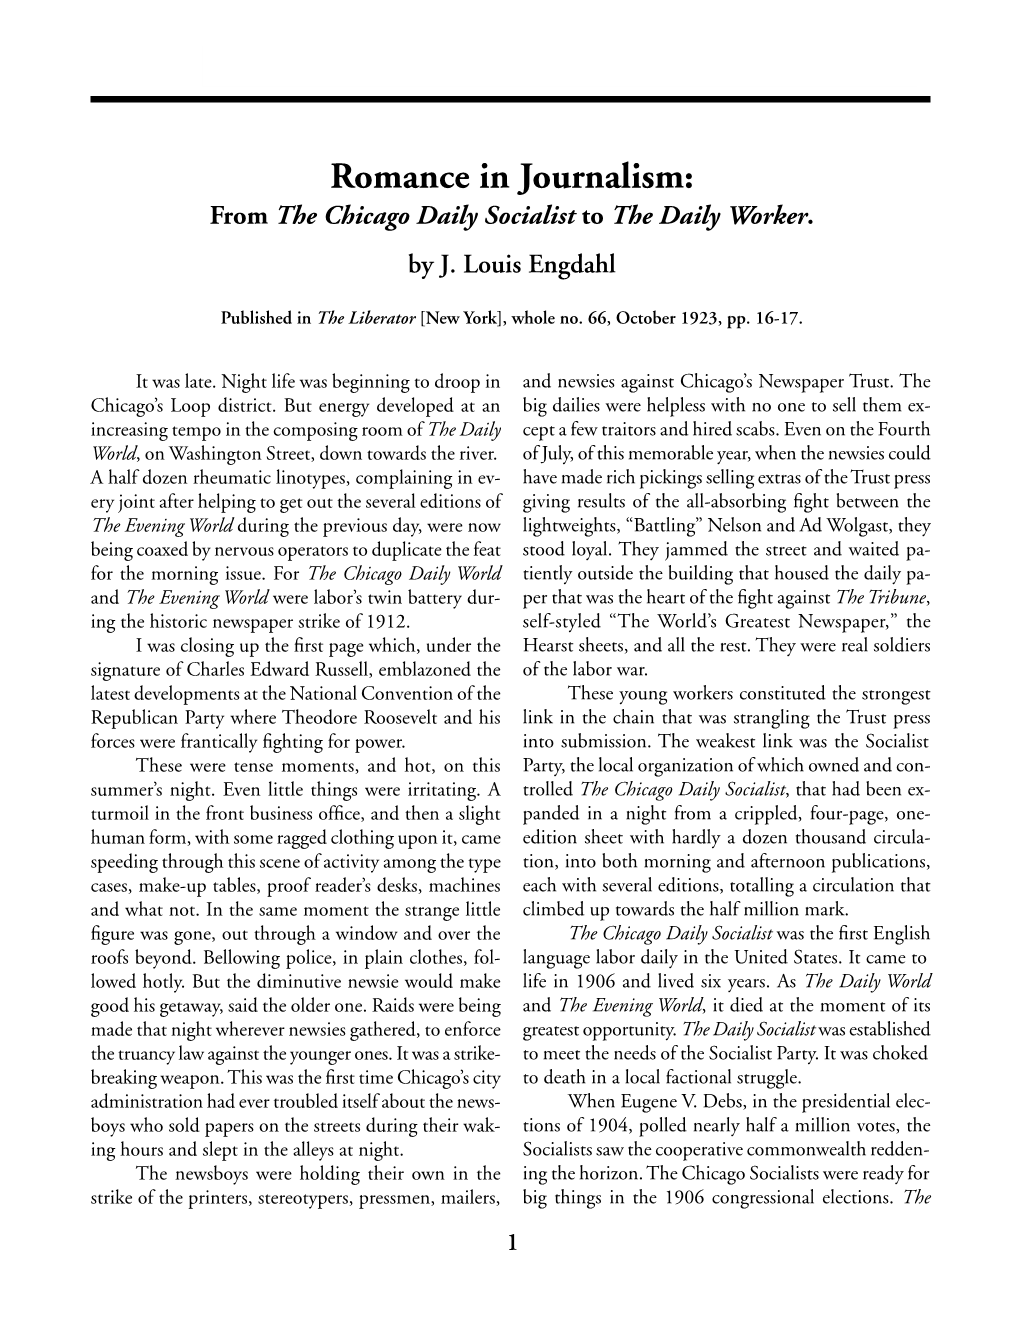 Romance in Journalism: from the Chicago Daily Socialist to the Daily Worker